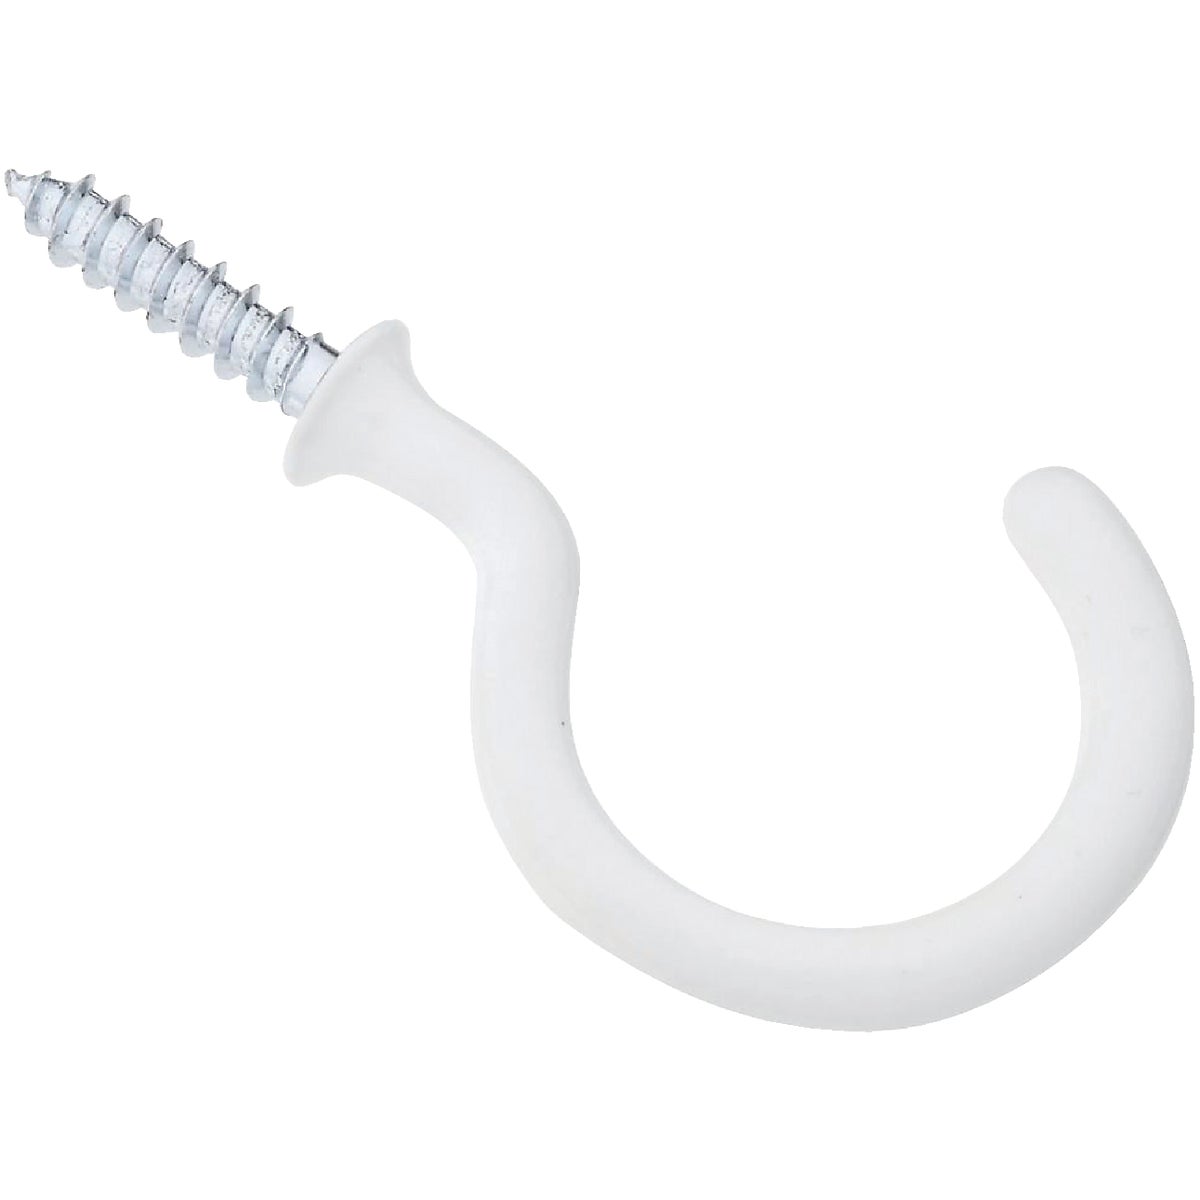 National 1-1/2 In. White Vinyl Cup Hook (2 Count)